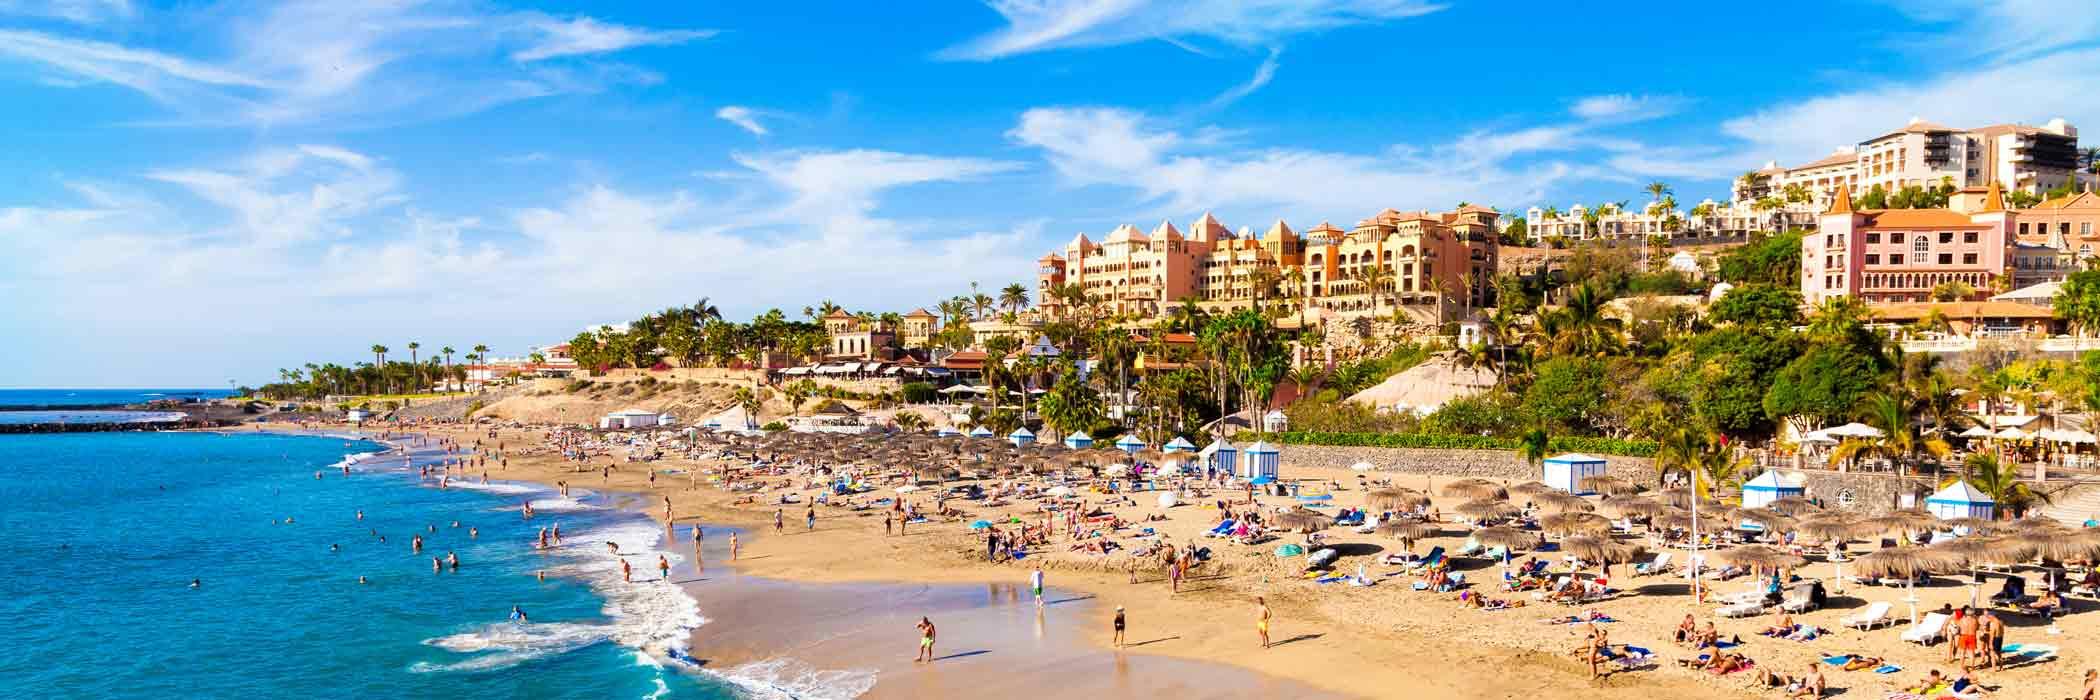 All Inclusive Holidays To Tenerife